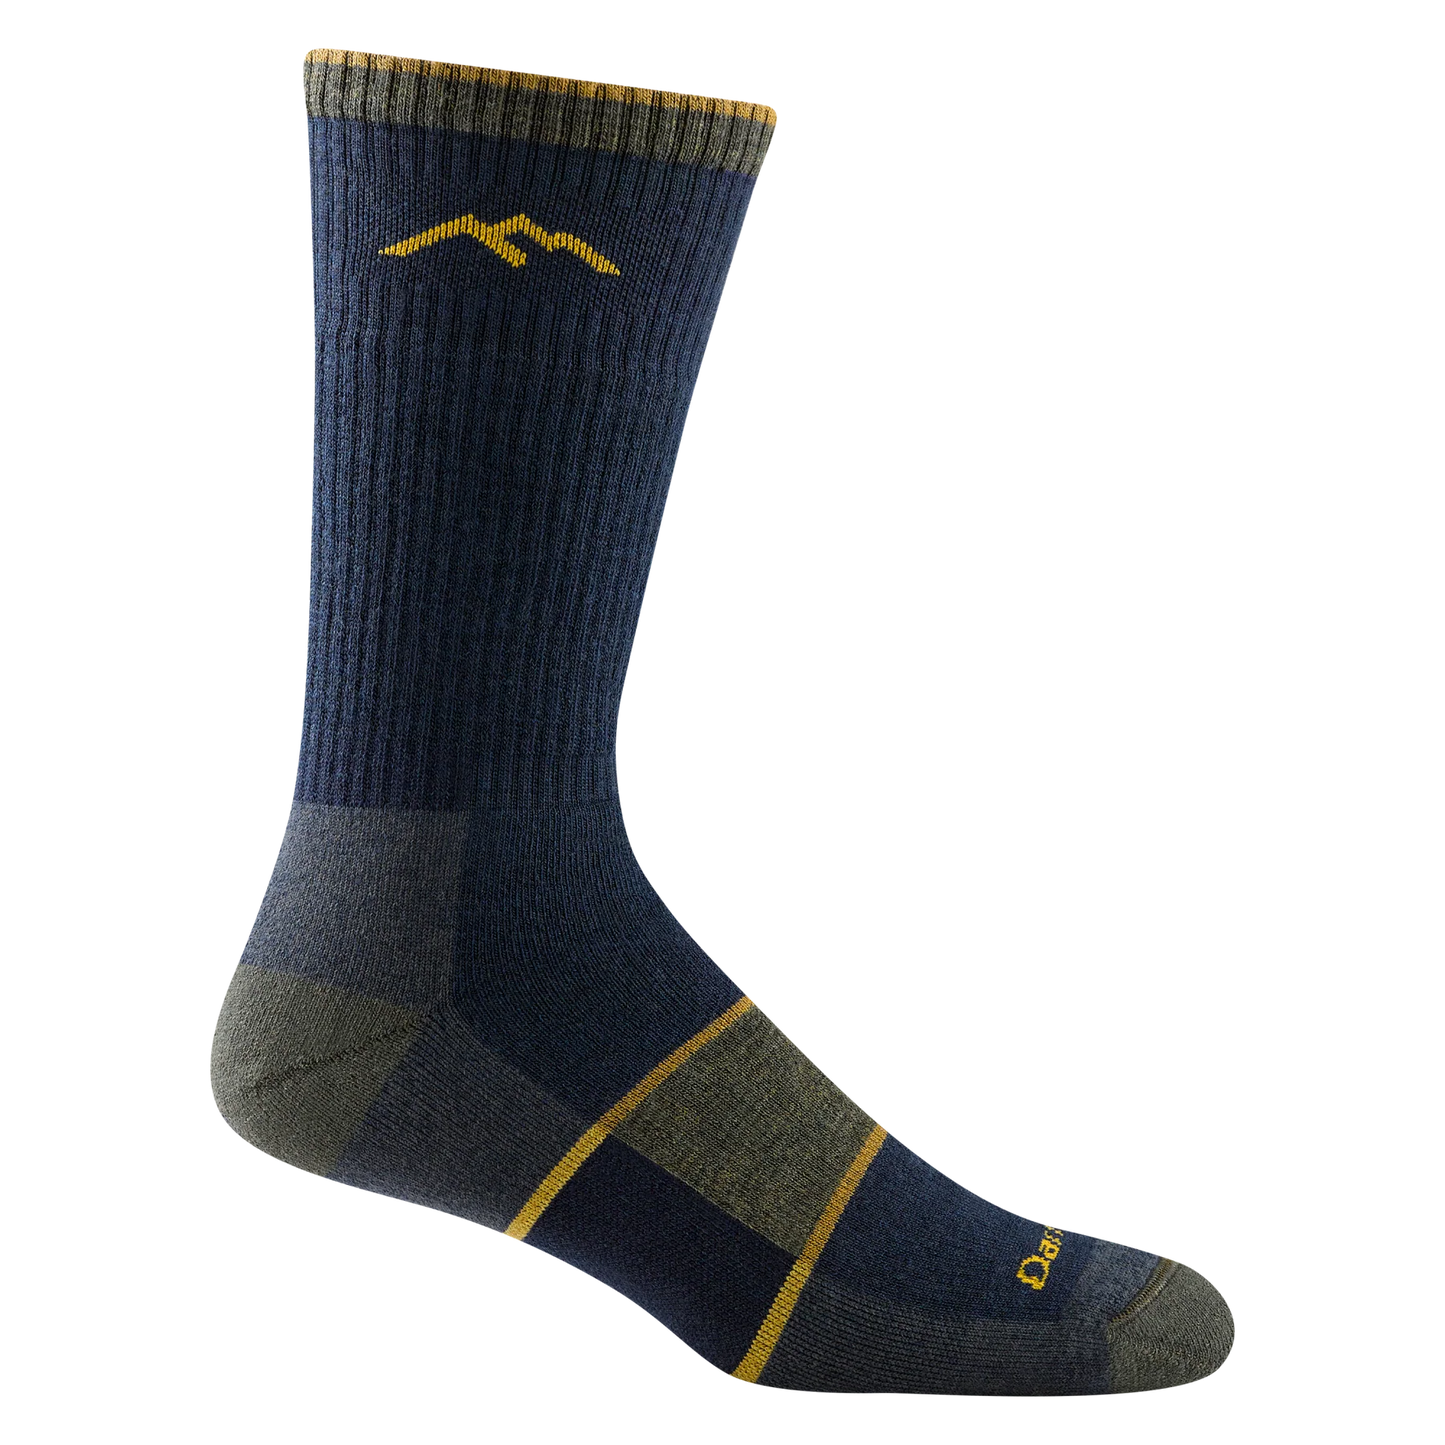 Darn tough navy blue sock with yellow mountain outline detail, olive green toe and heel